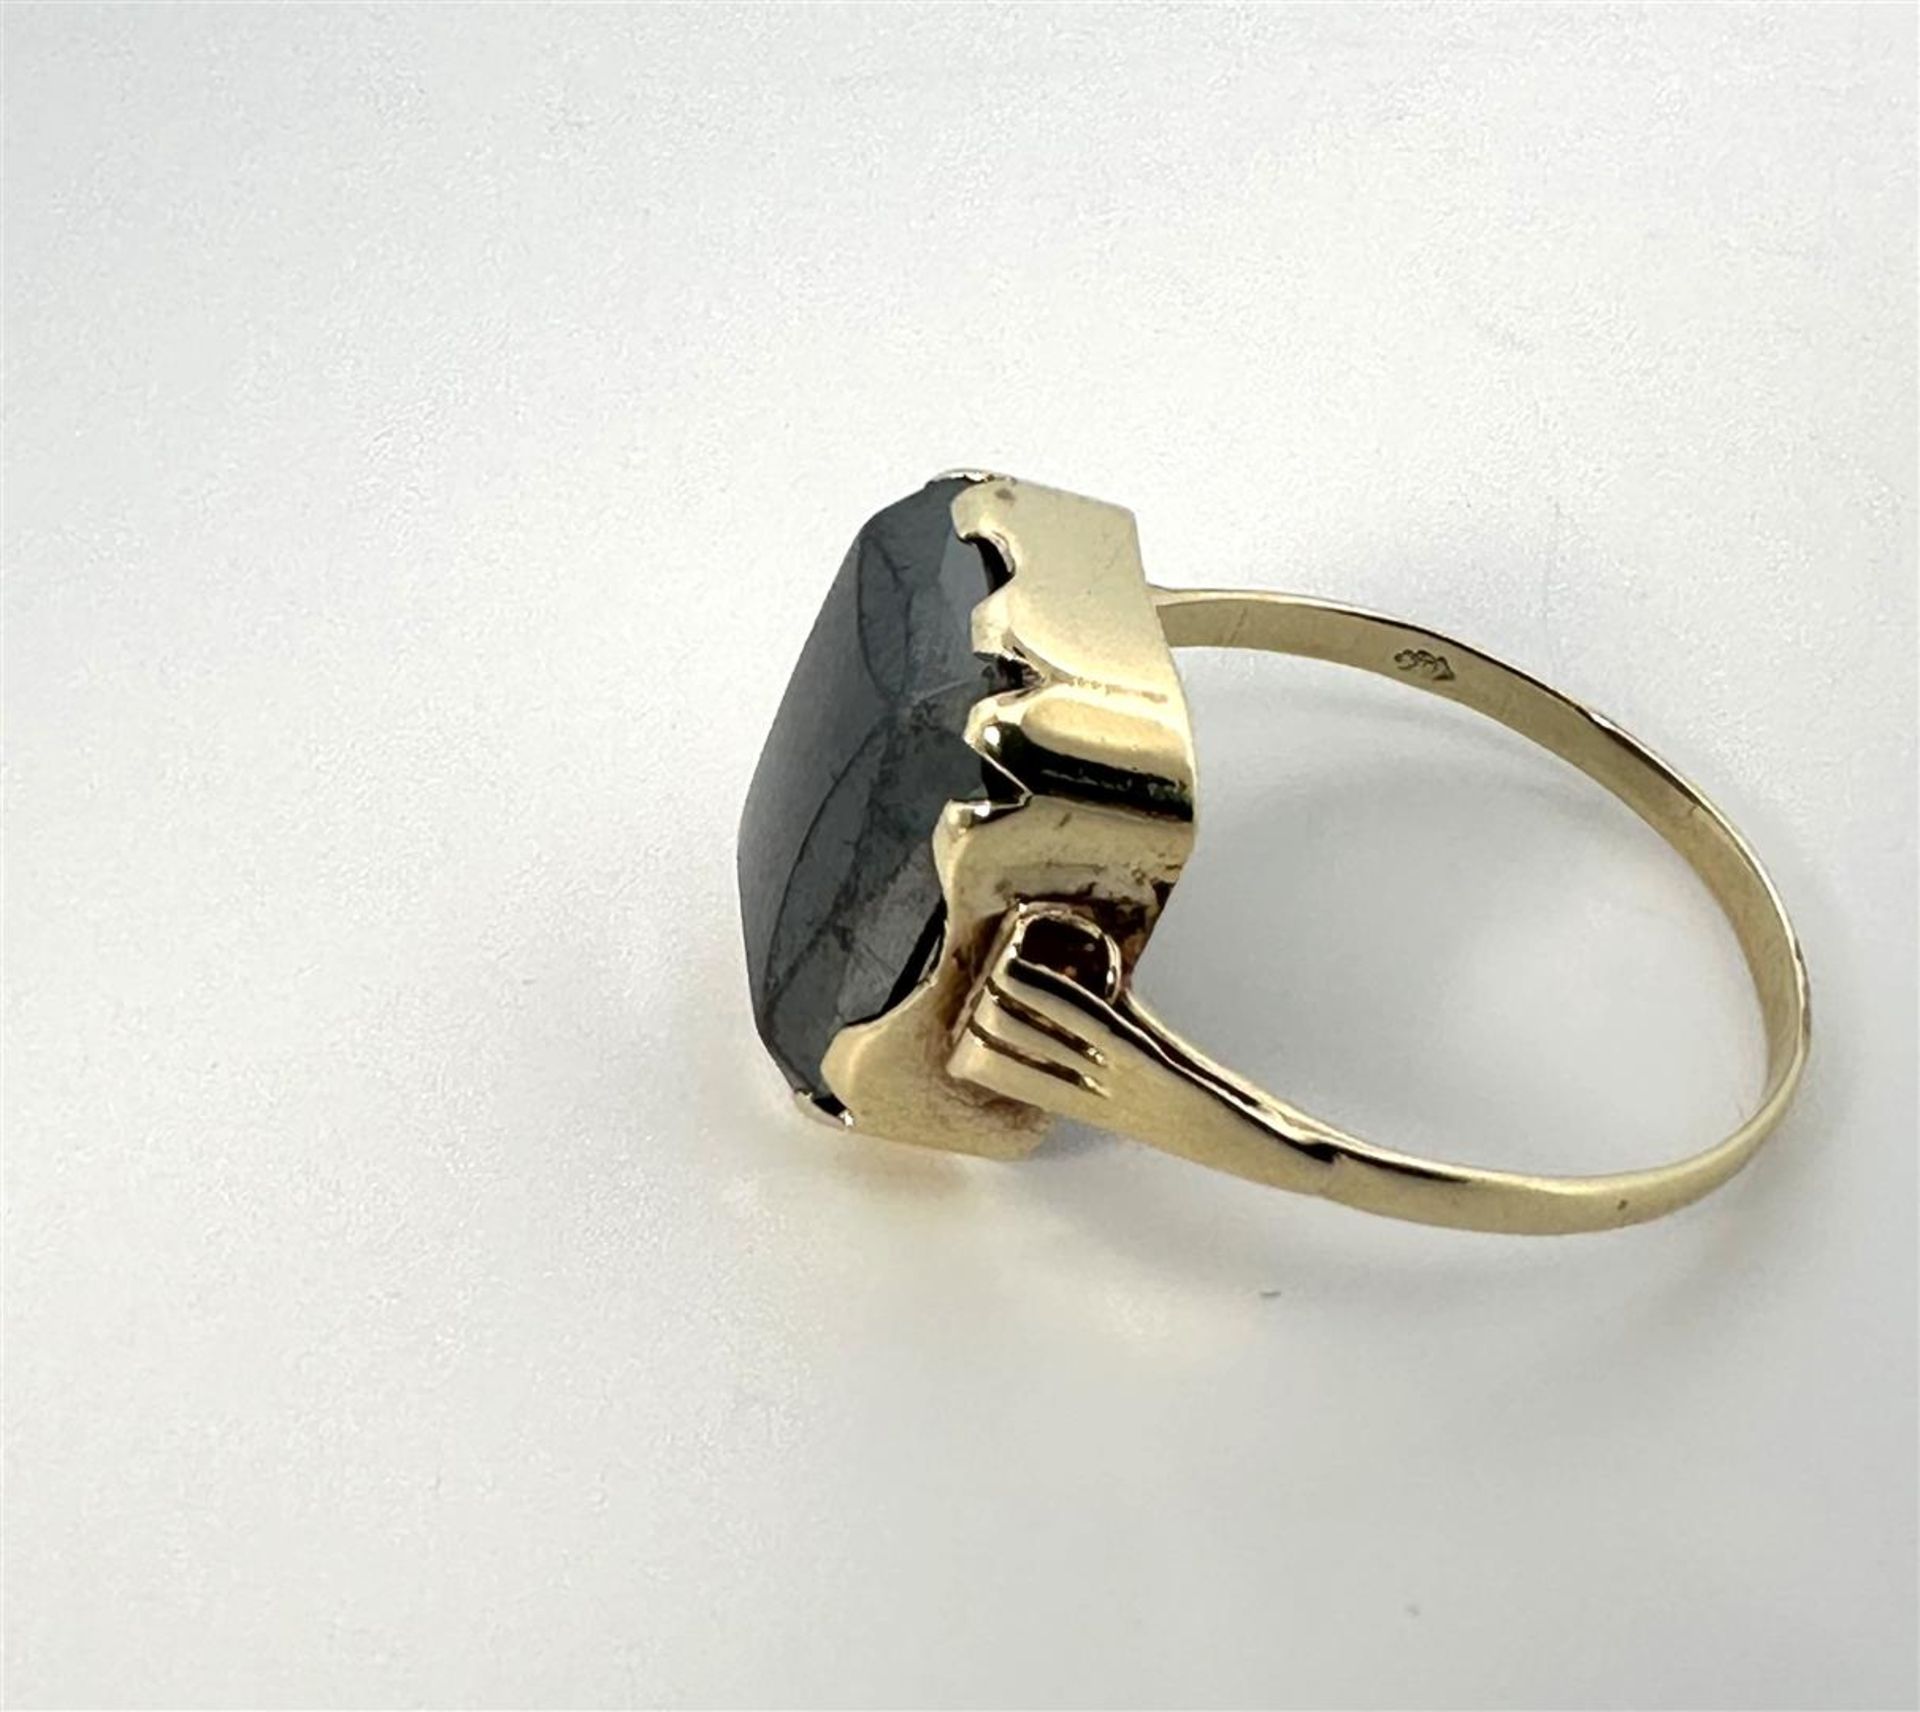 14kt yellow gold ring set with hematite.
The ring features a fantasy scissor cut hematite gemstone. 